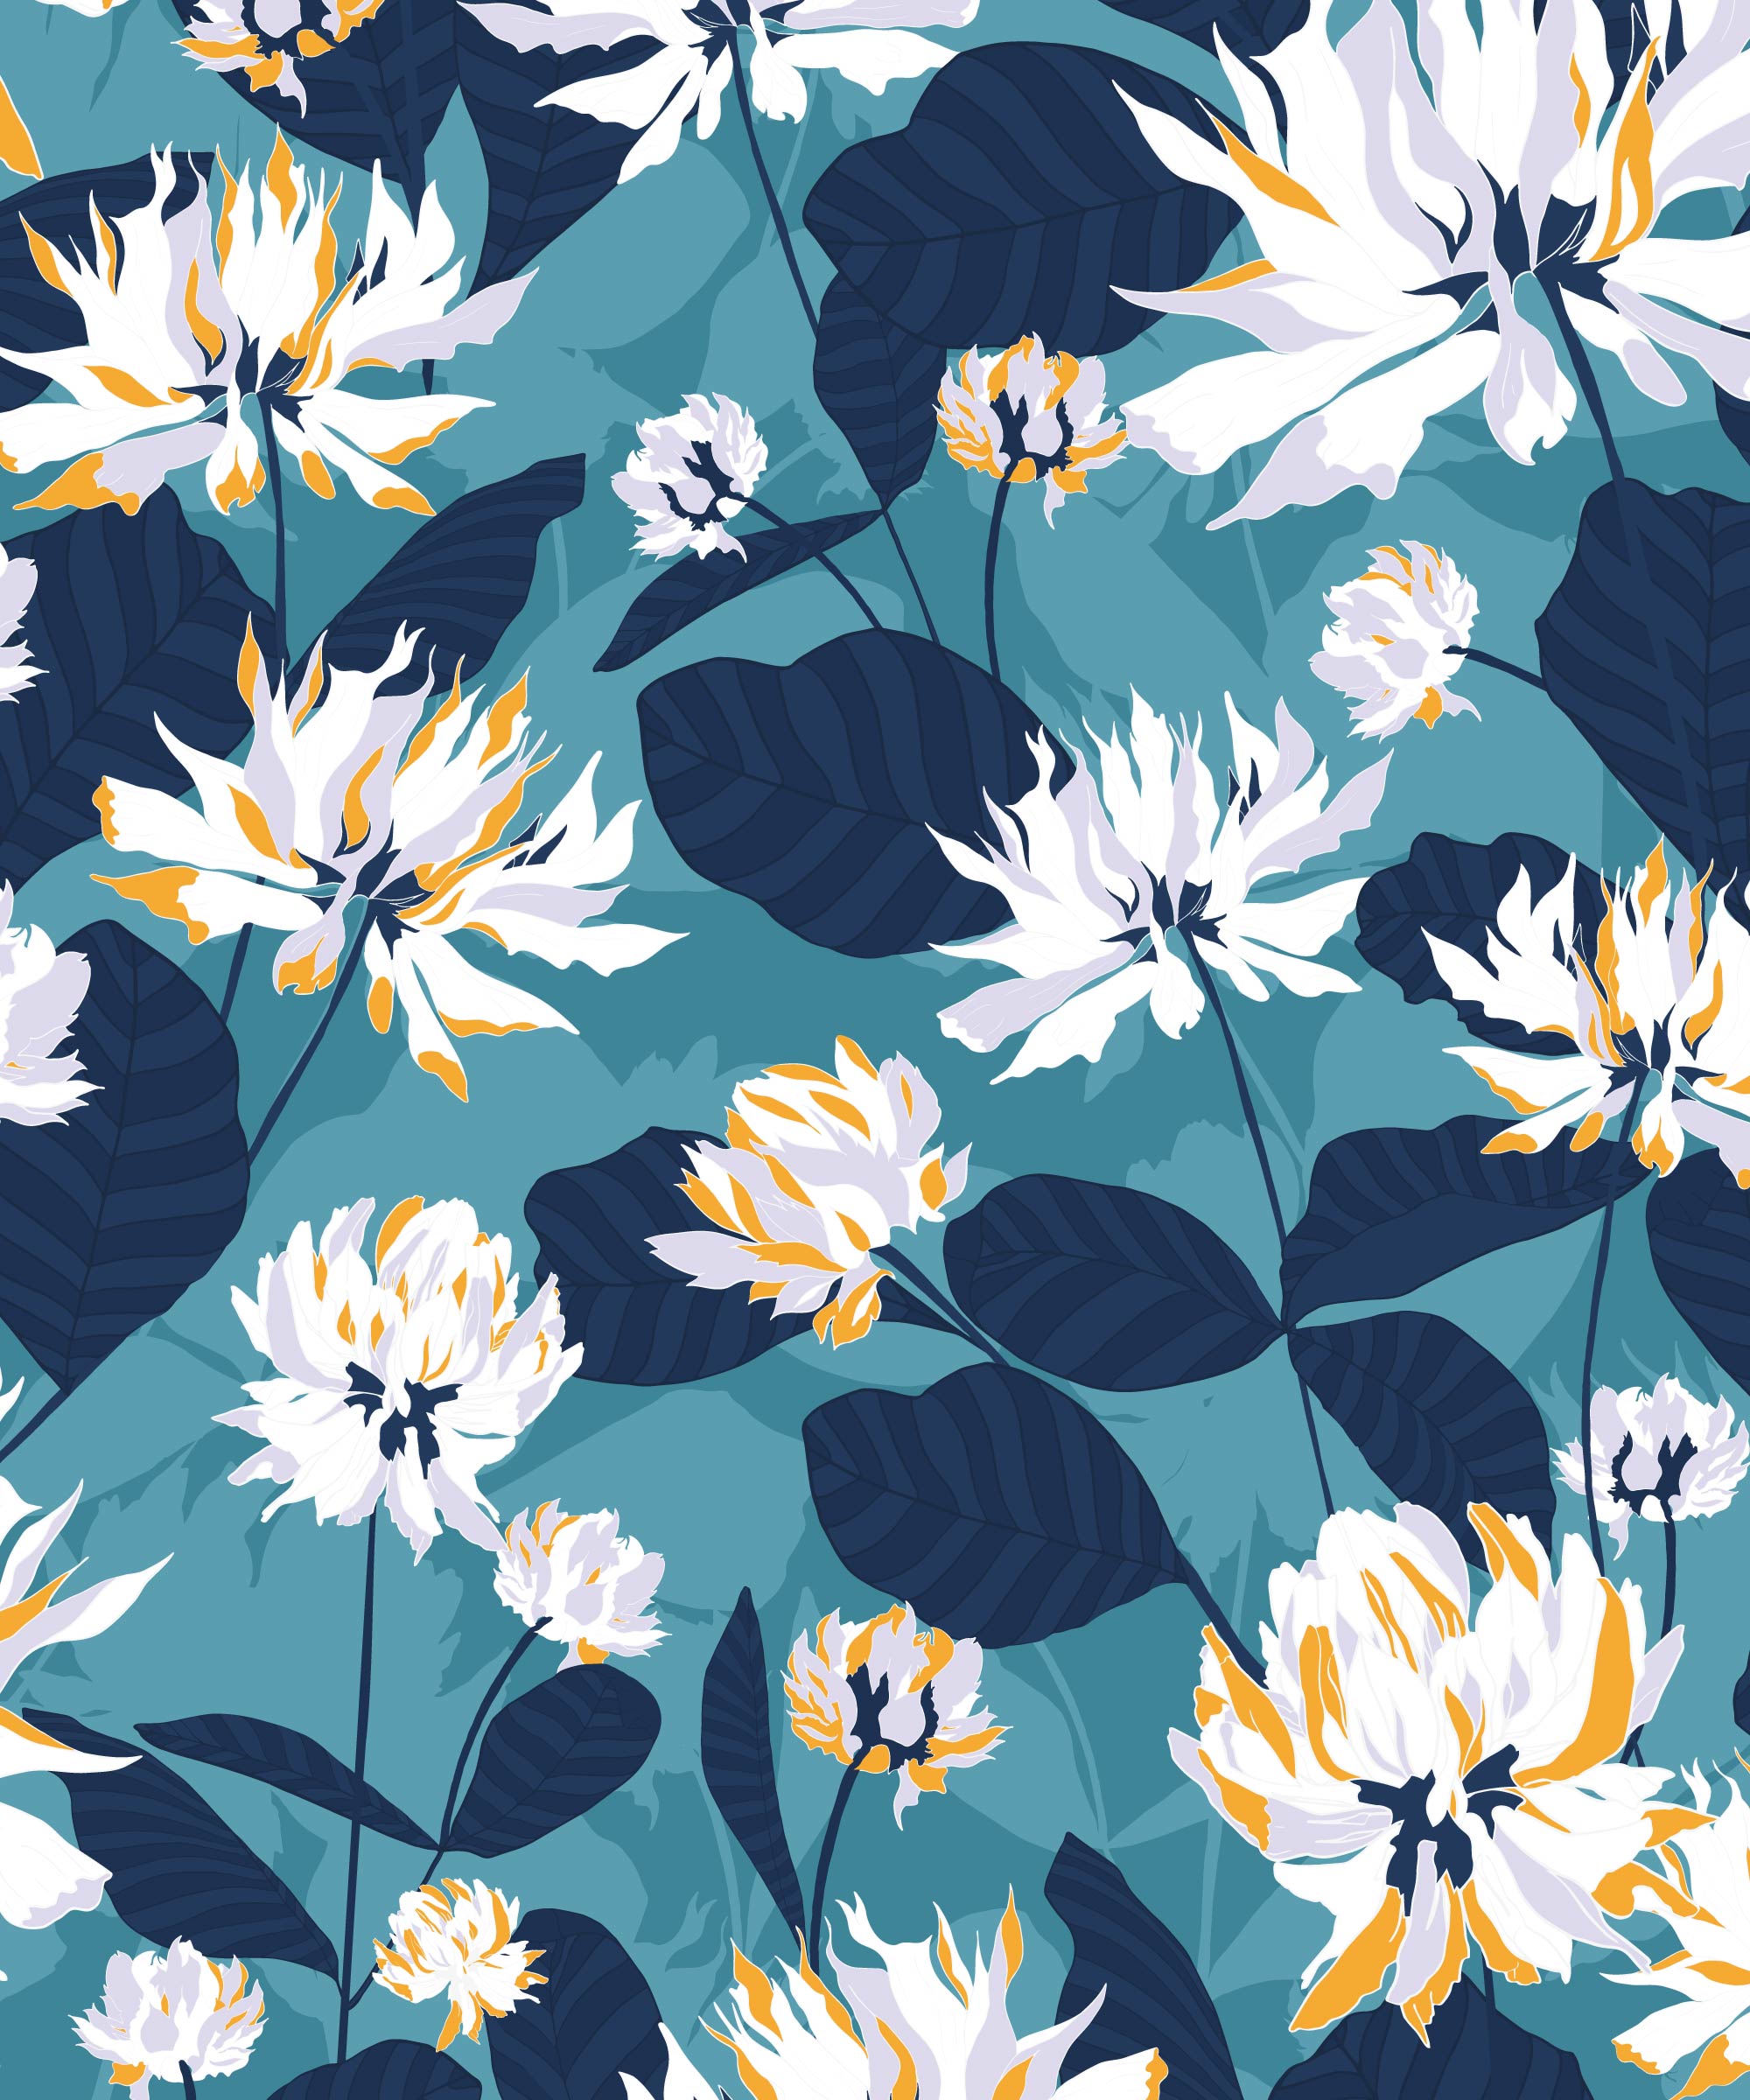 Clover flowers pattern in blues and yellows